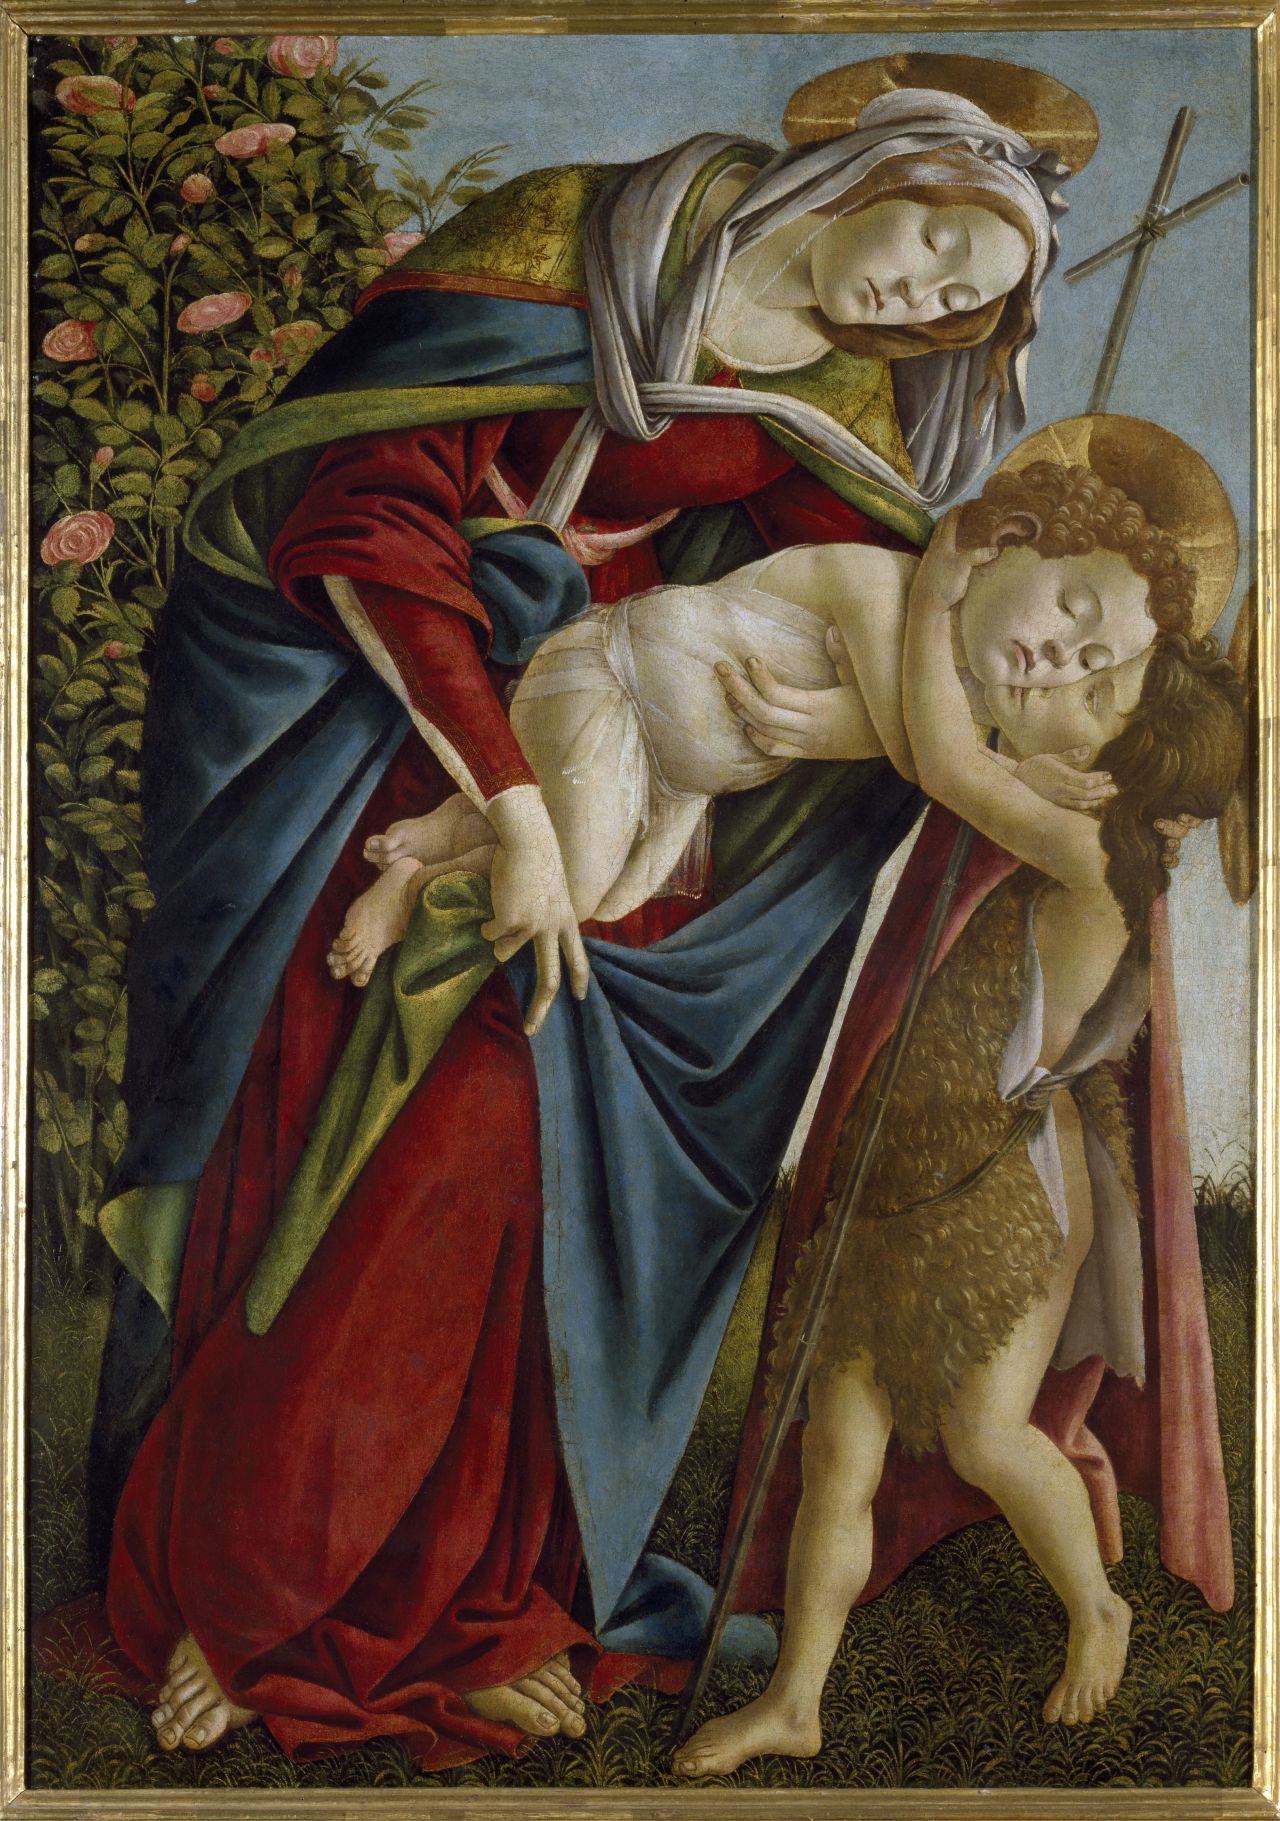 "Madonna and Child with the Young St John," c.1500, by Sandro Botticelli. Though he had long created works for the Medici family, art historians say Botticelli's later works suggest emotional anguish -- perhaps relating to the preaching of Savonarola.